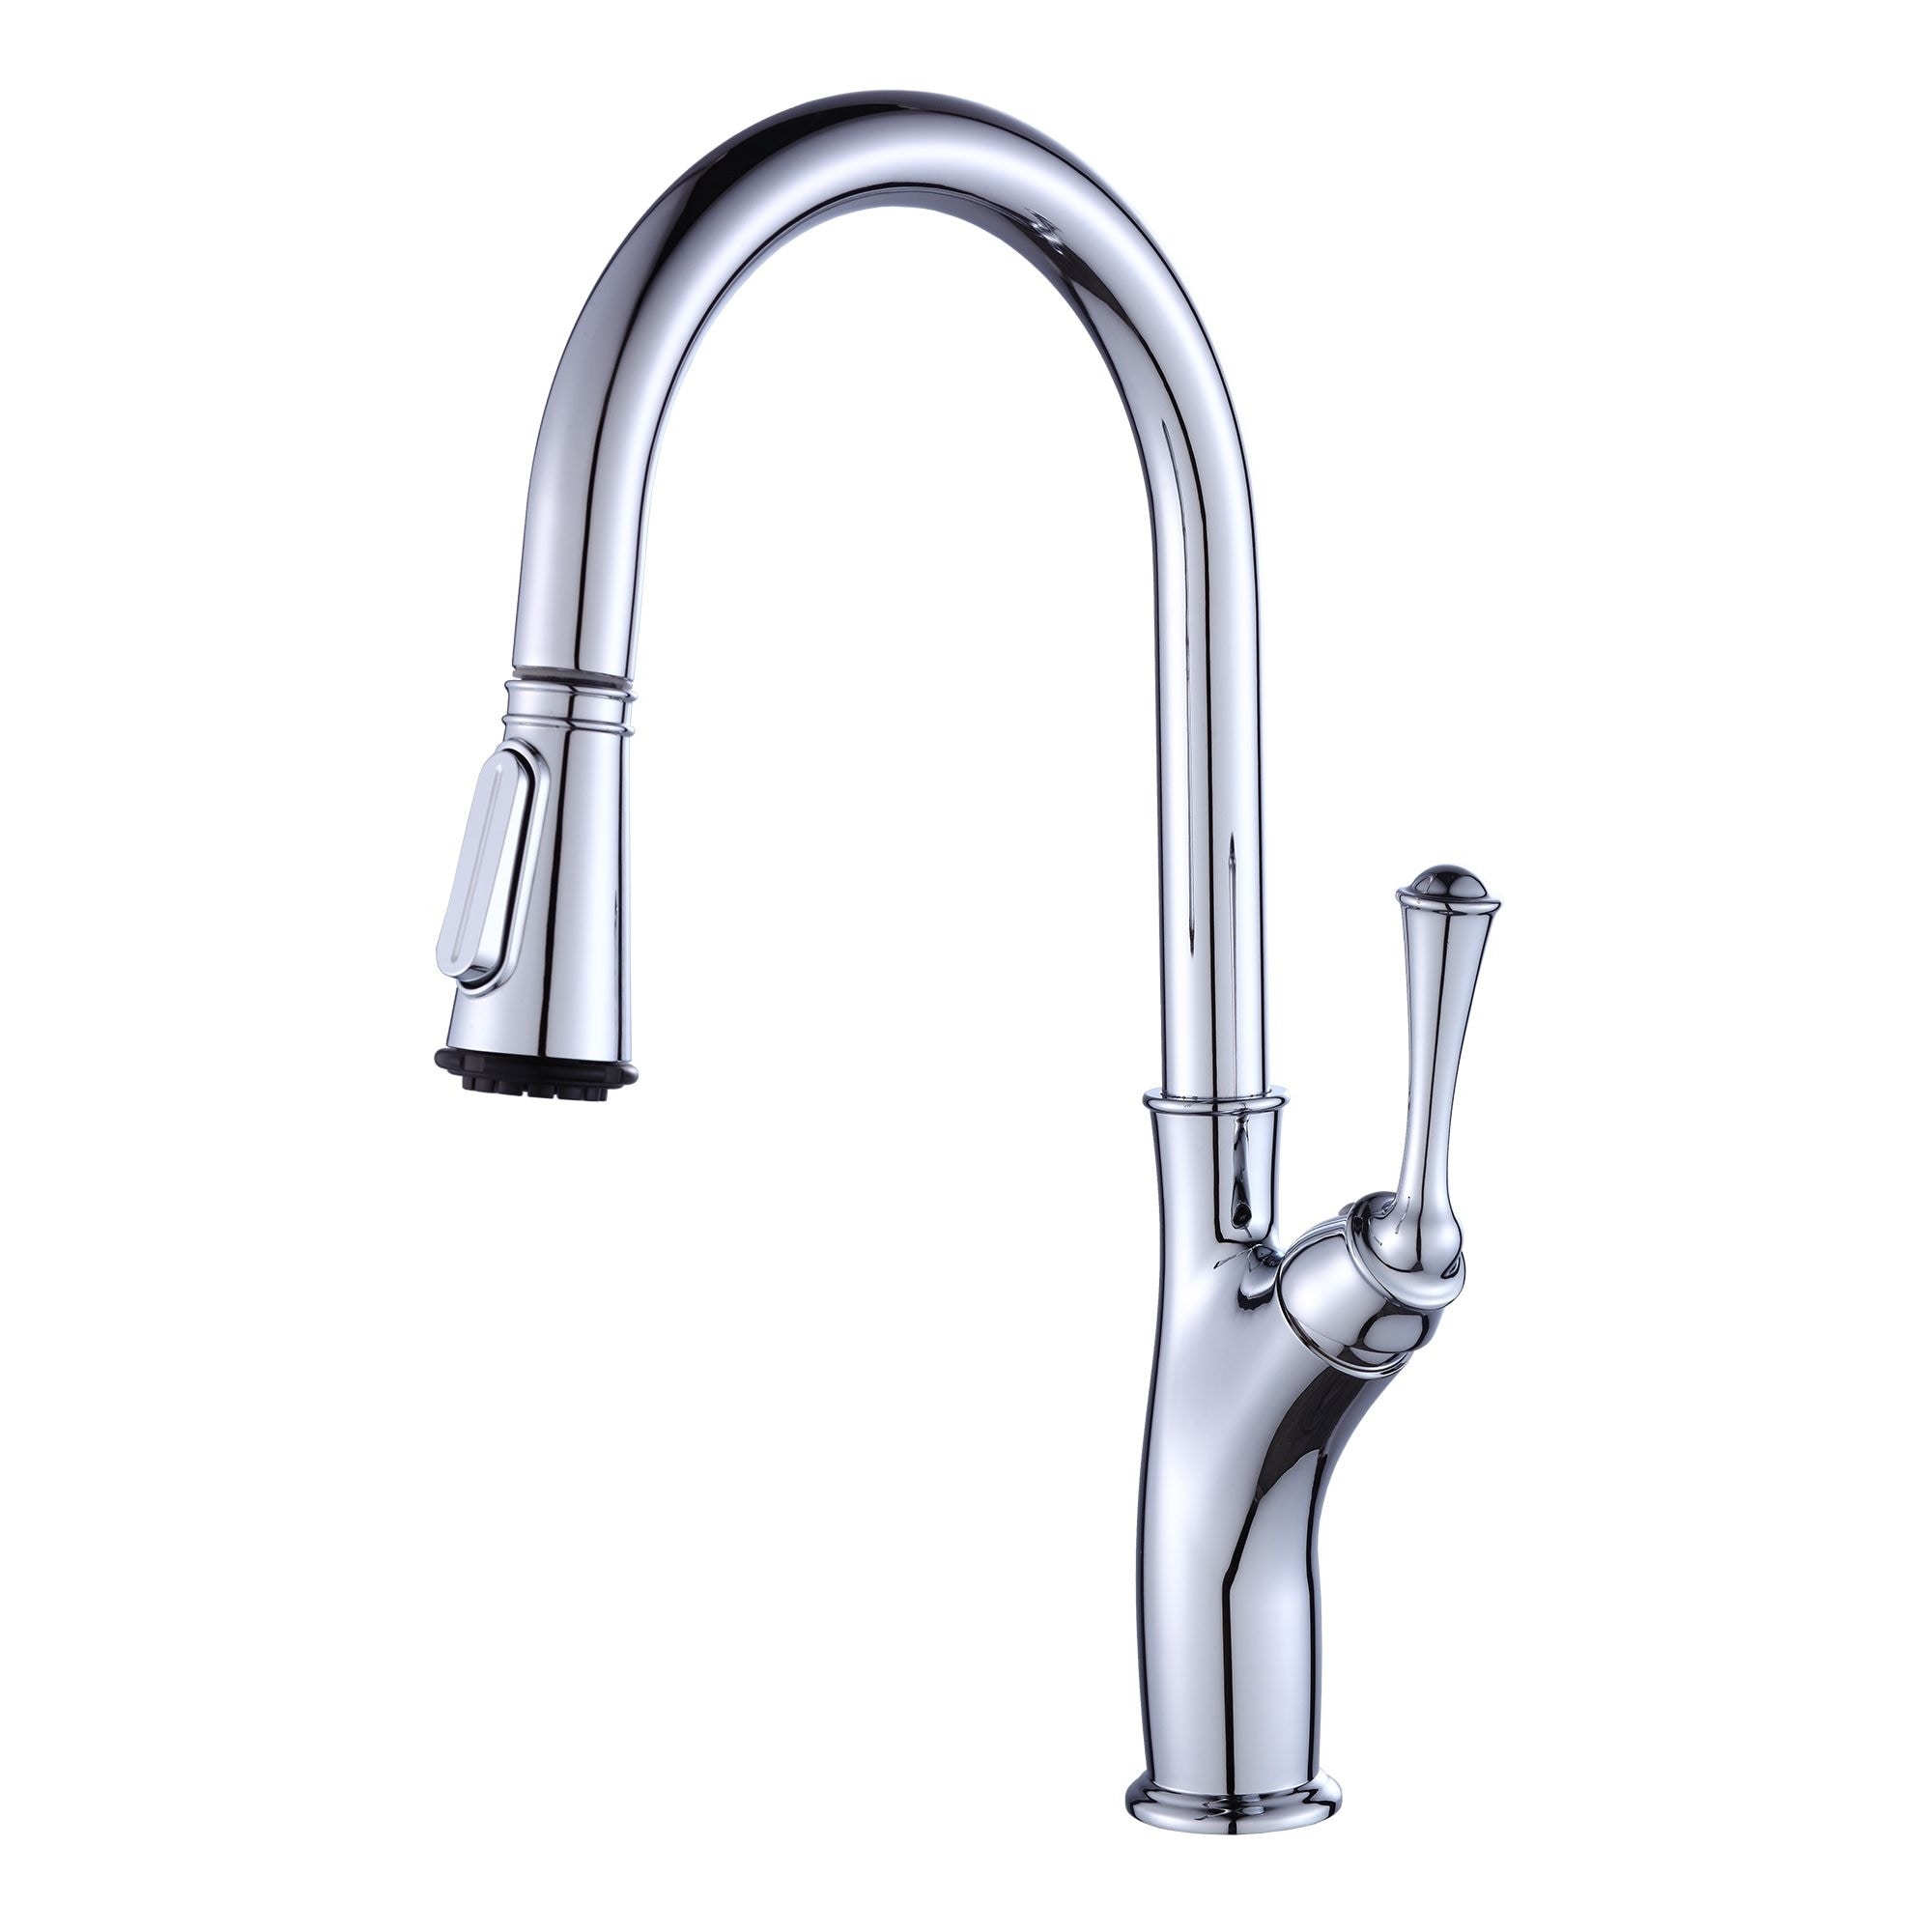 Hot and Cold Washbasin Pan Basin SLT0213 Pull Type Faucet Faucet Pull Faucetquality Assurance of Modern Simple Luxury Kitchen Stainless Steel Washbasin Washing Basin Luxury and Ancient Class H 